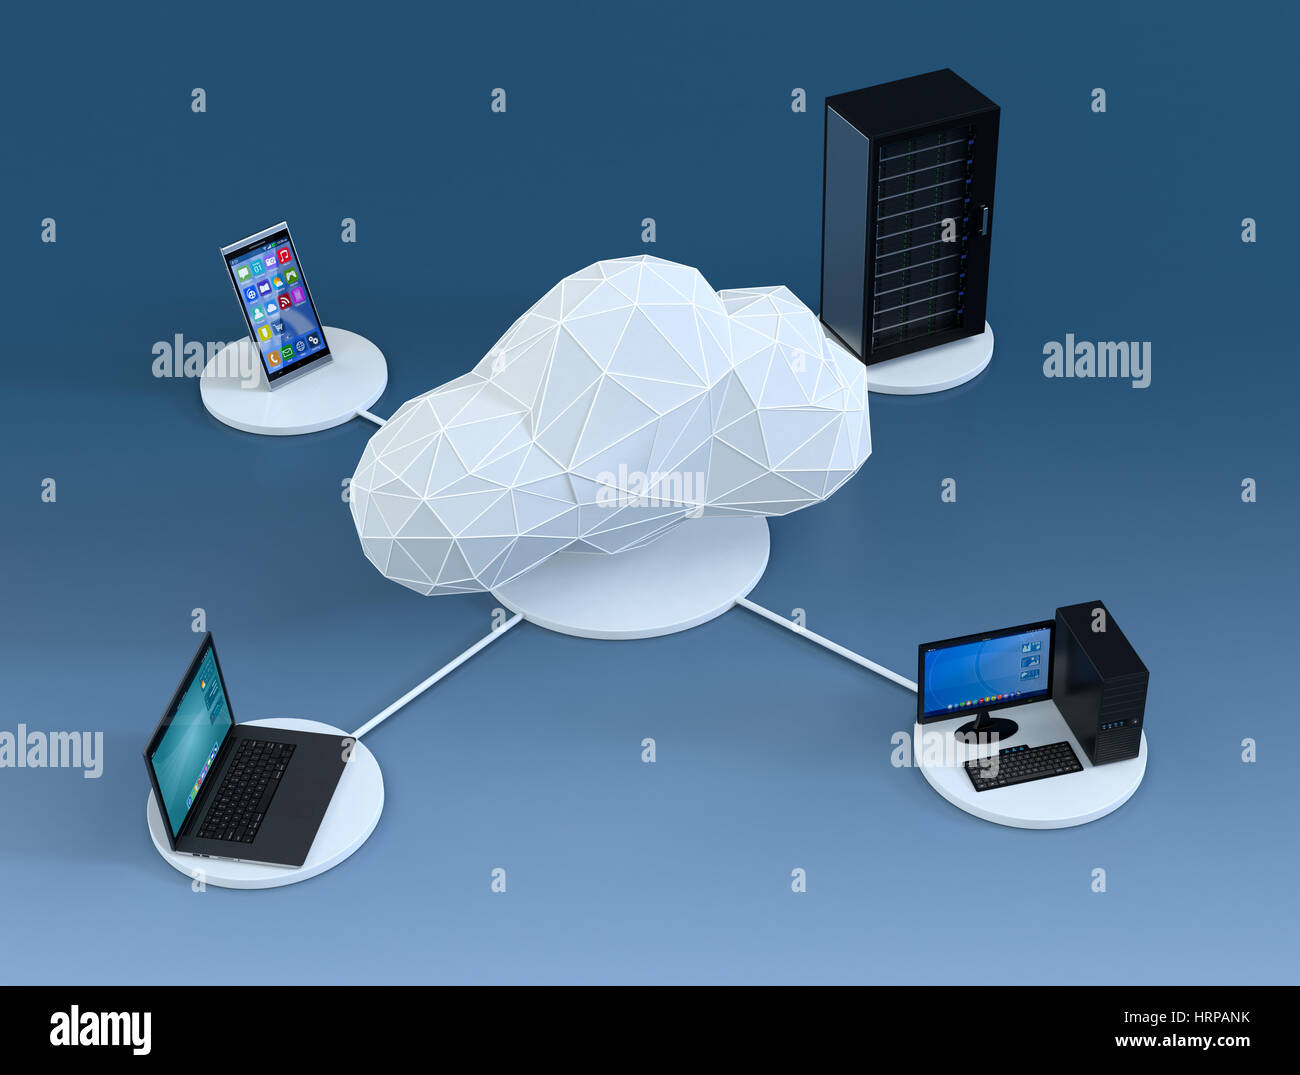 top view of a smartphone, a computer notebook, a desktop pc, a computer server cabinet, the devices are connected to a cloud made with the technique o Stock Photo